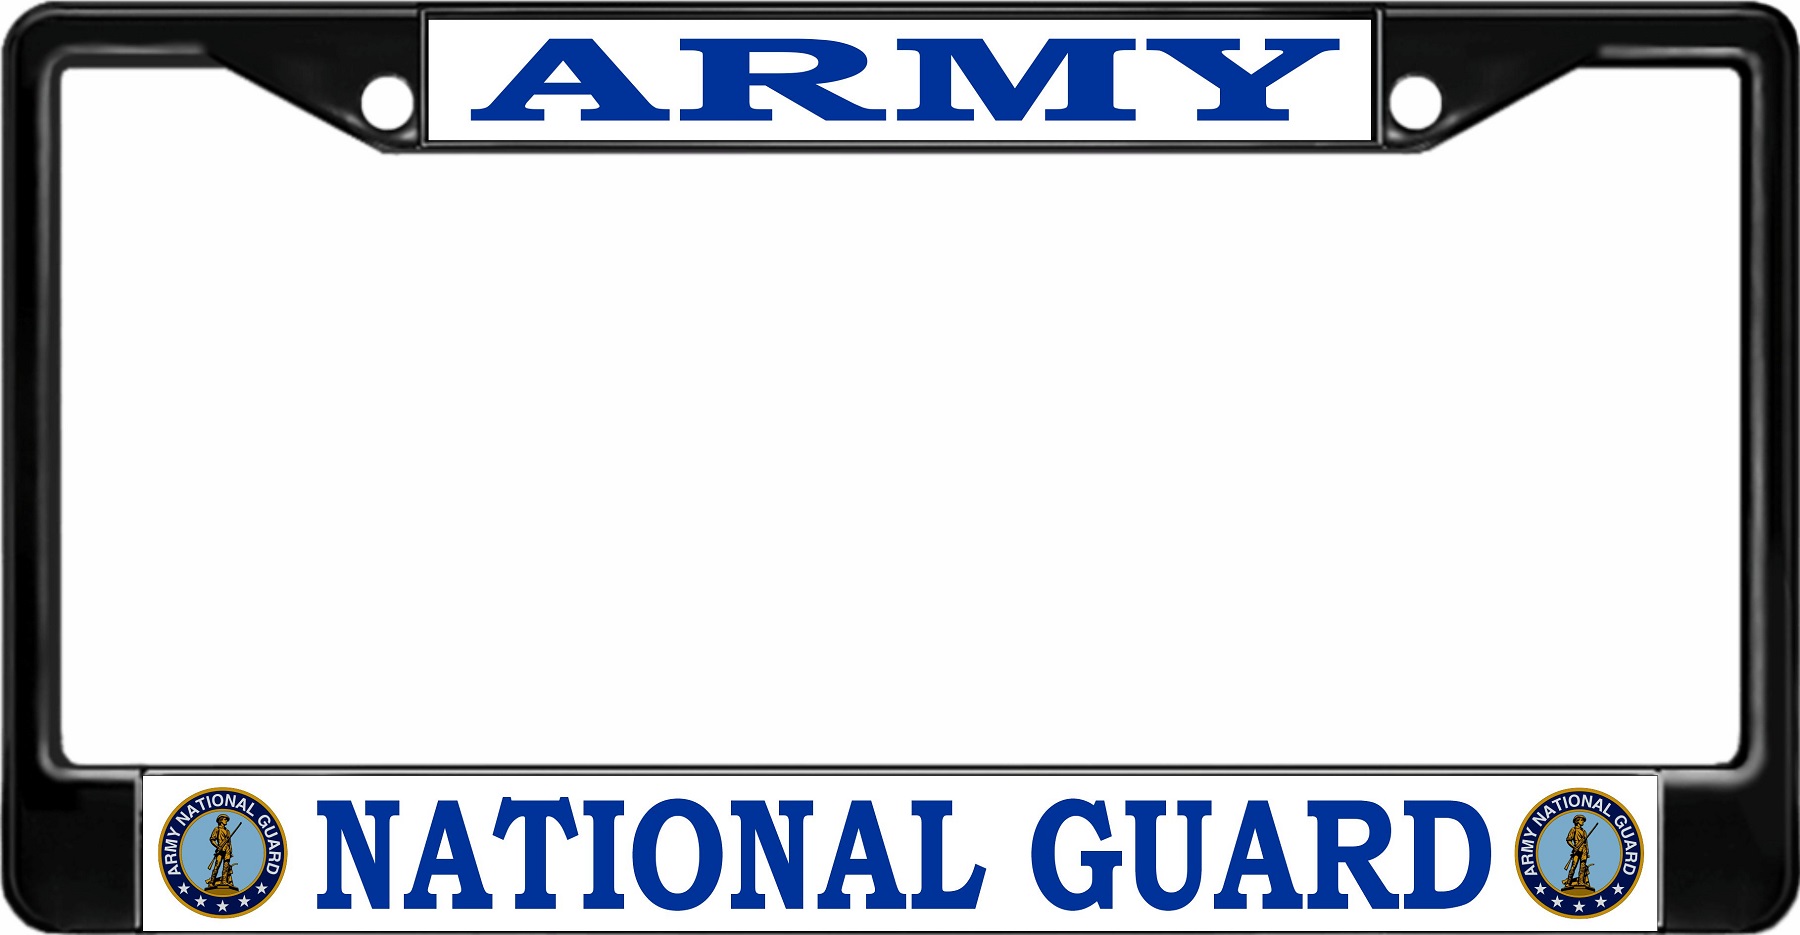 Army National Guard Black License Plate FRAME